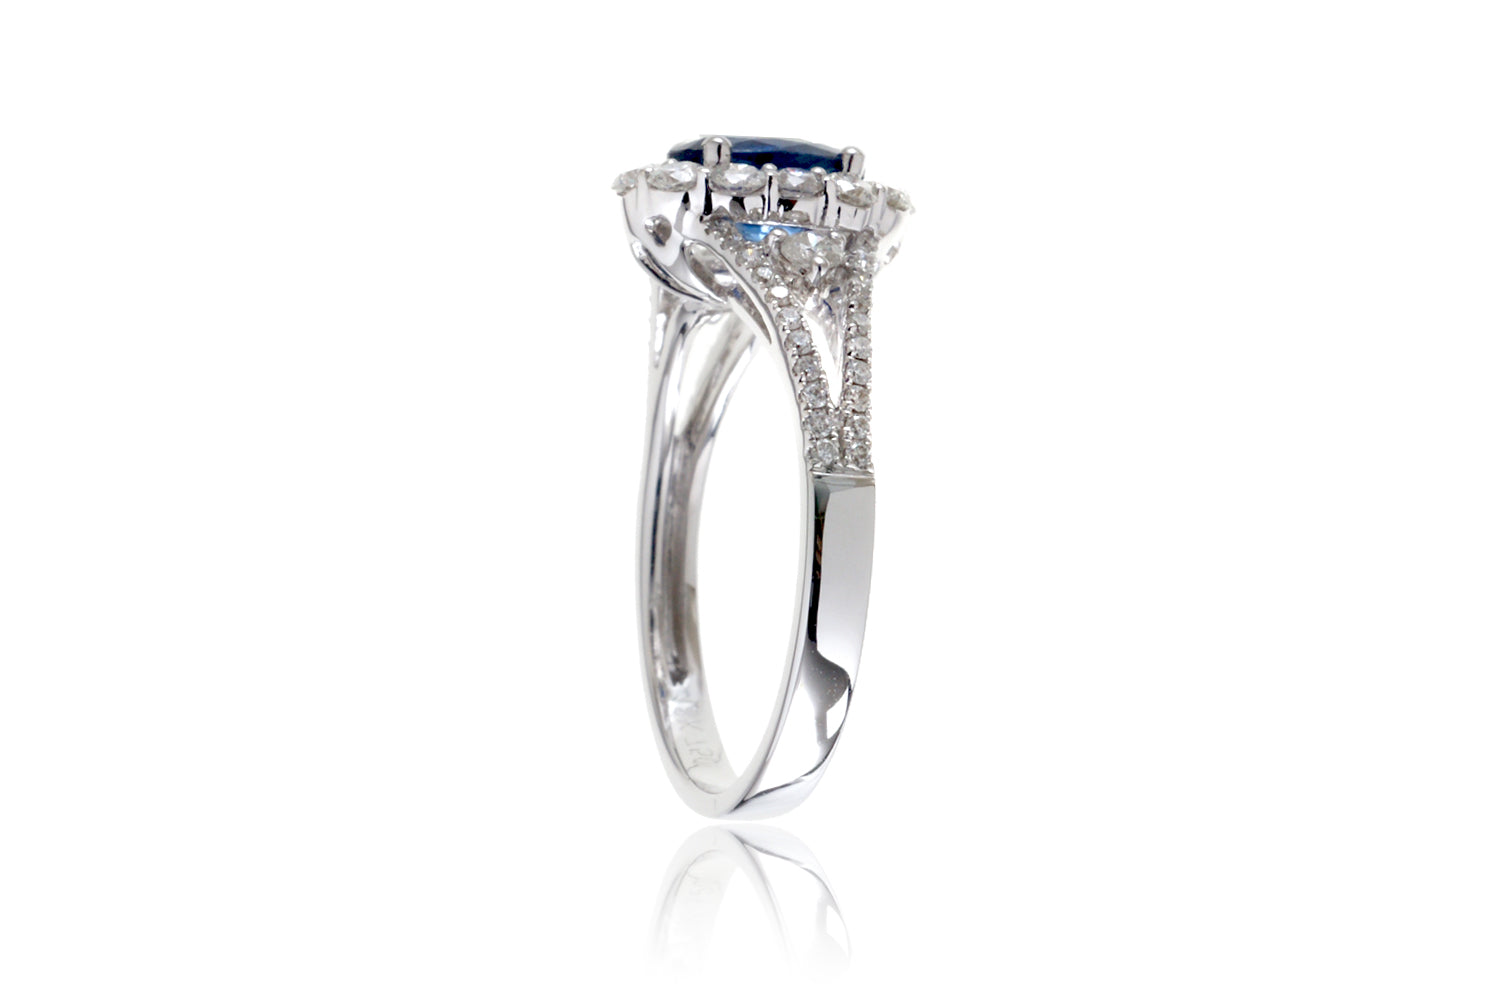 The Chelsea Oval Sapphire